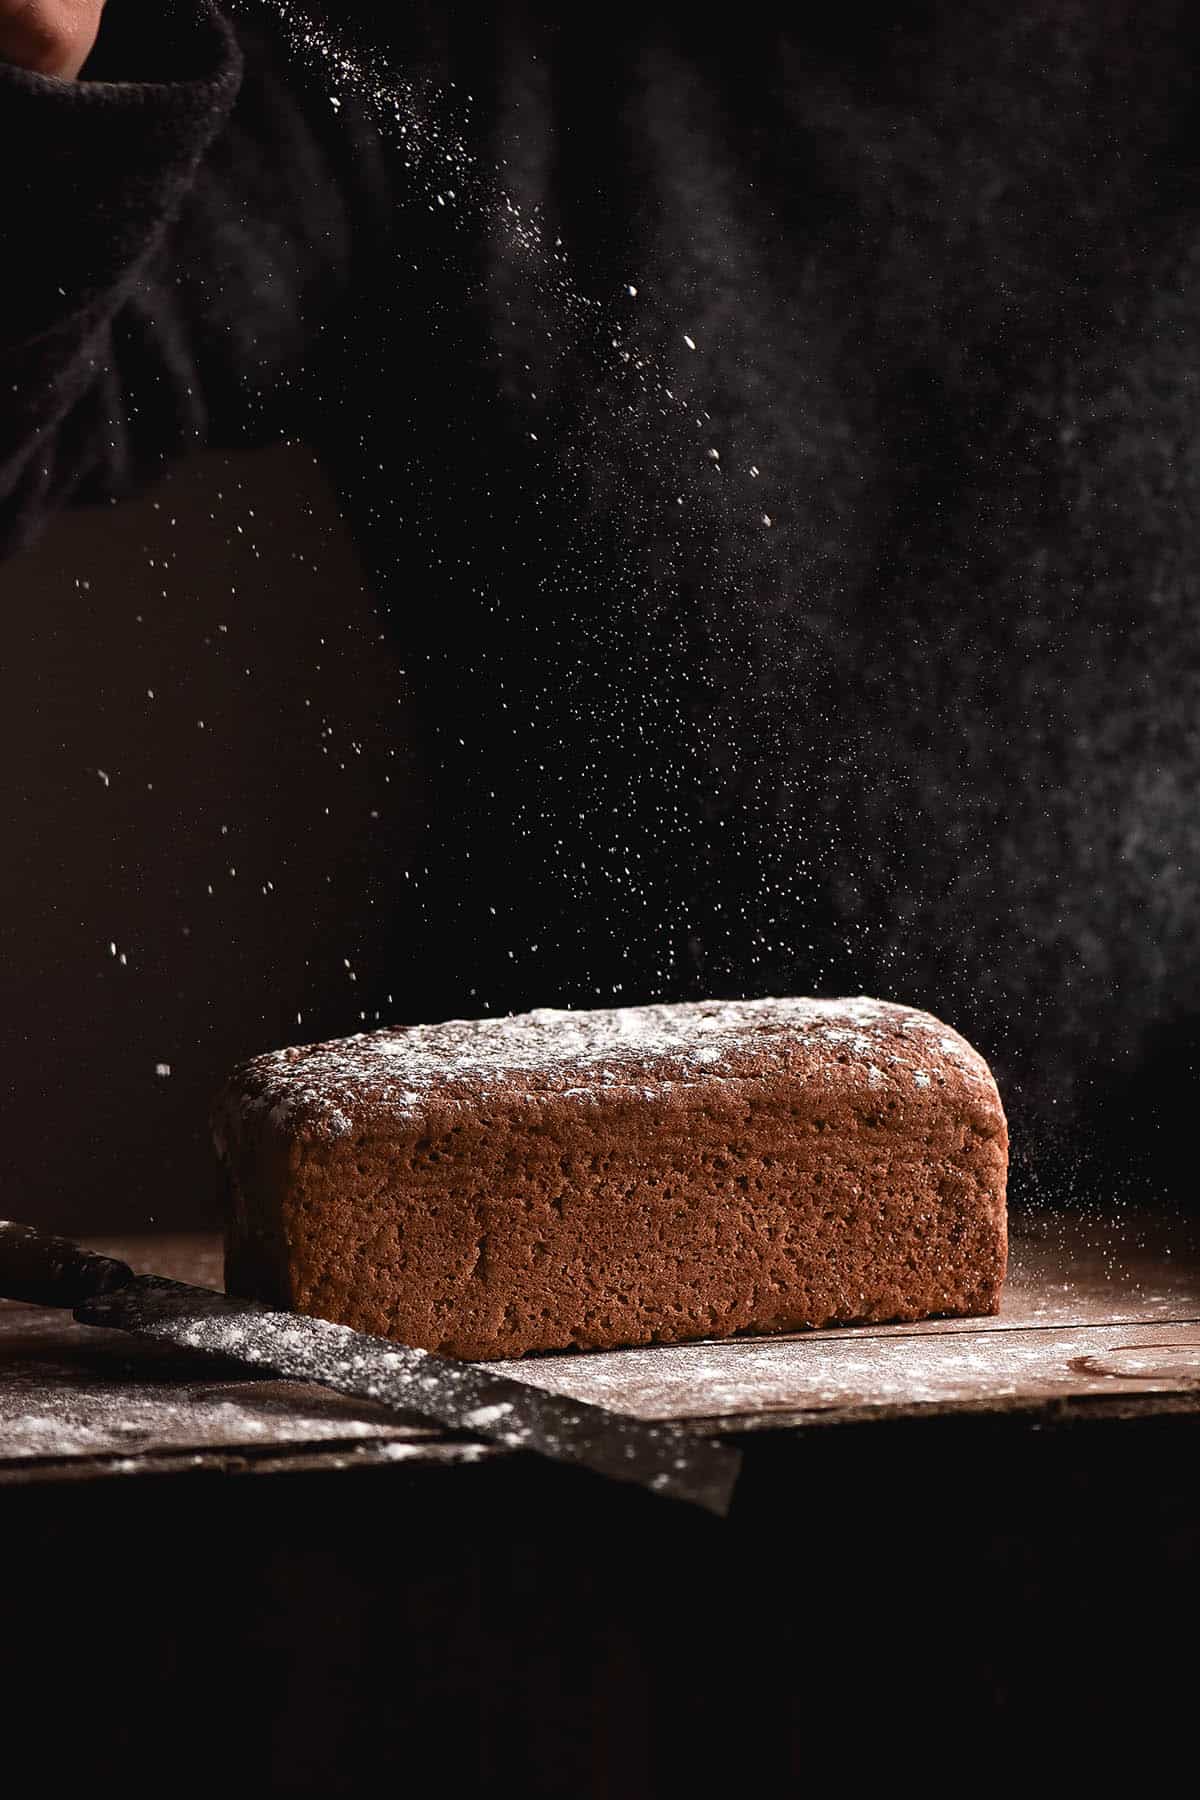 A dark and moody side on view of a loaf of gluten free, starch free sourdough bread against a dark backdrop. Flour sprinkles from the top of the image down onto the loaf, which contrasts against the dark backdrop